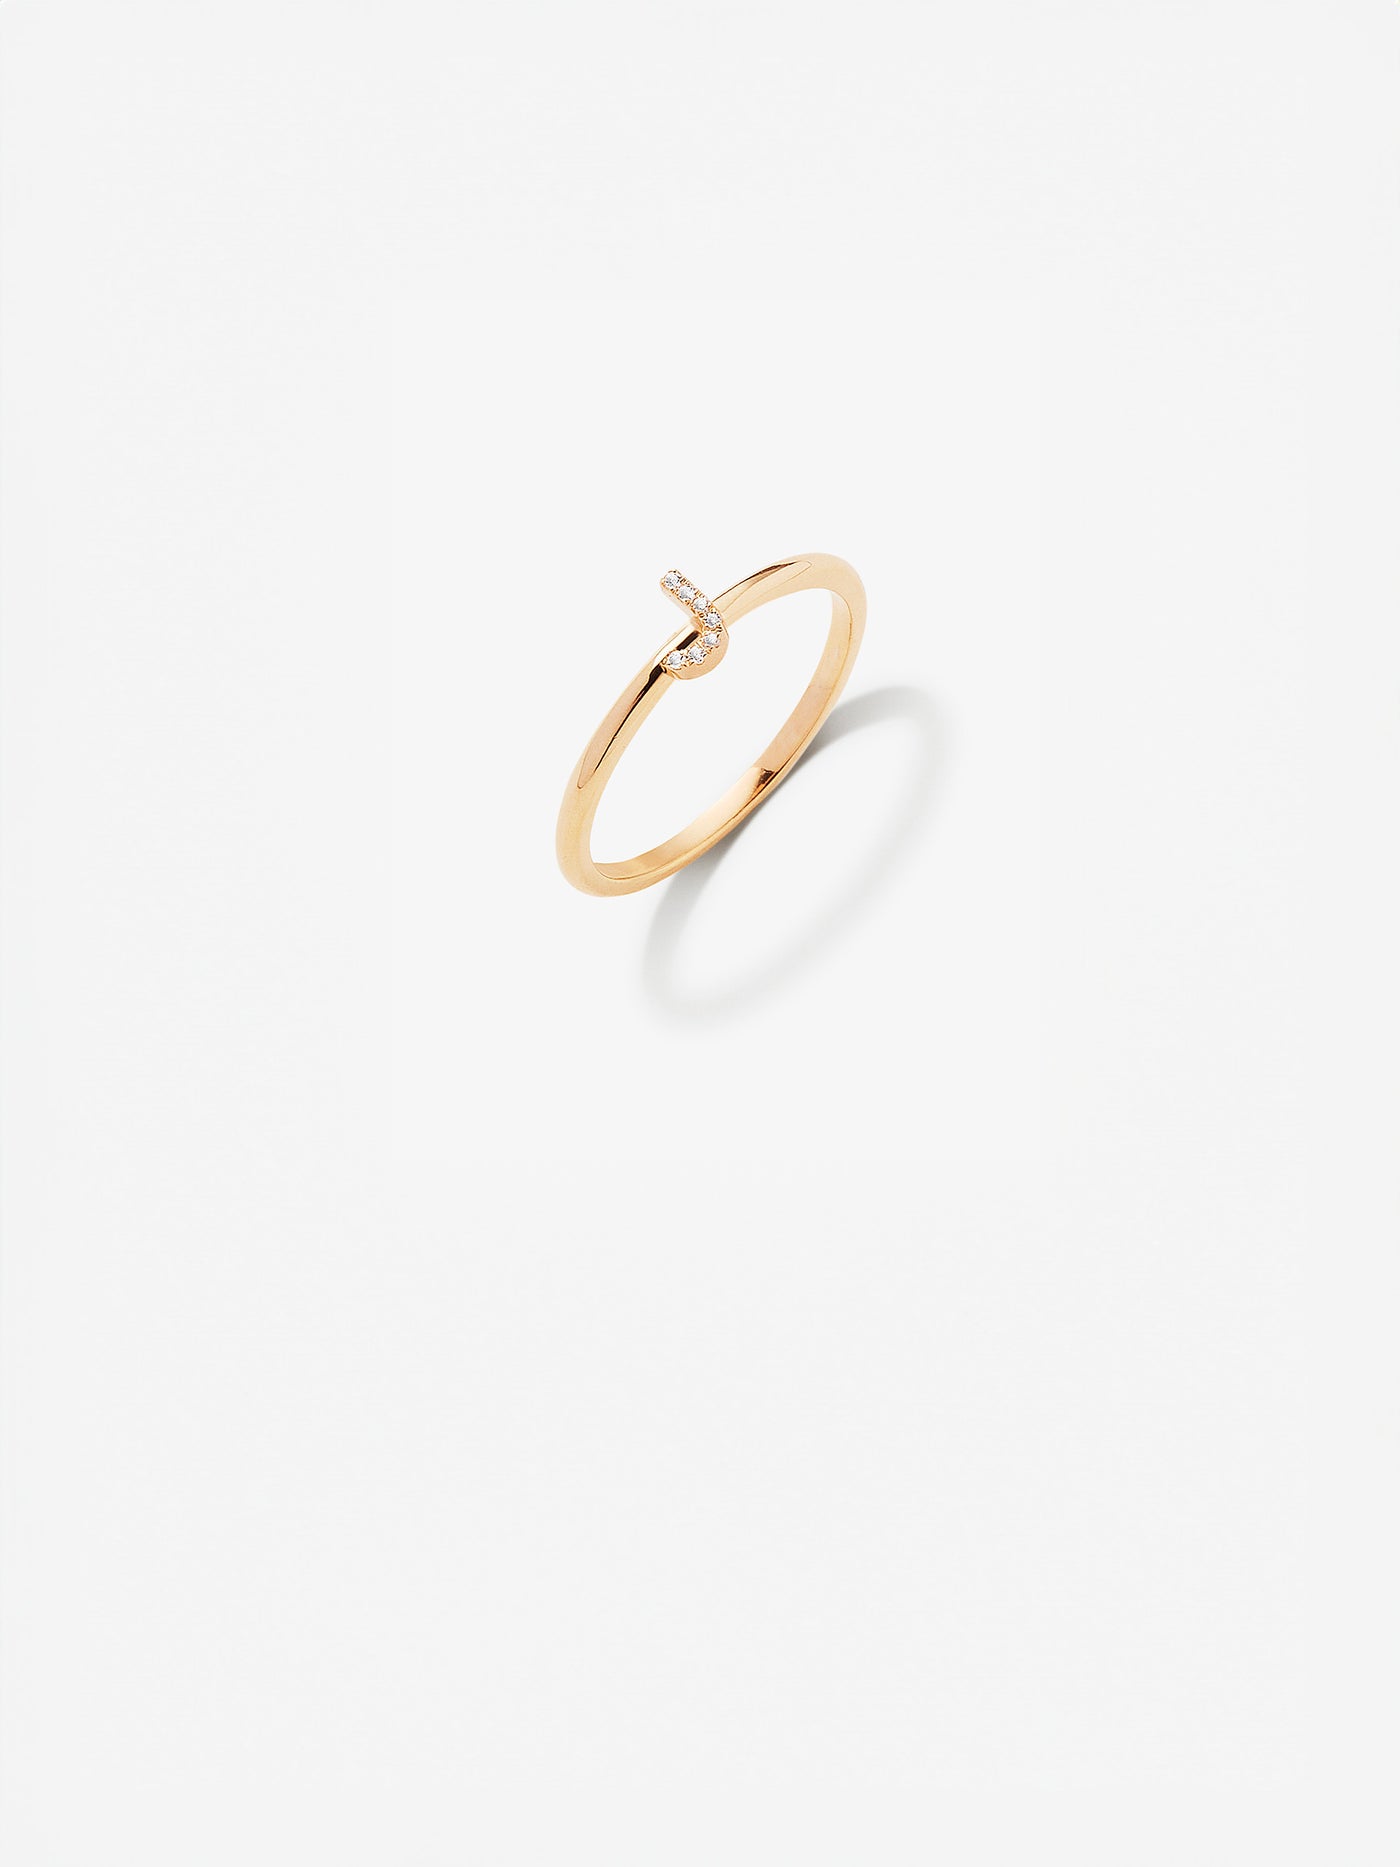 Letter J Ring in Diamonds and 18k Gold